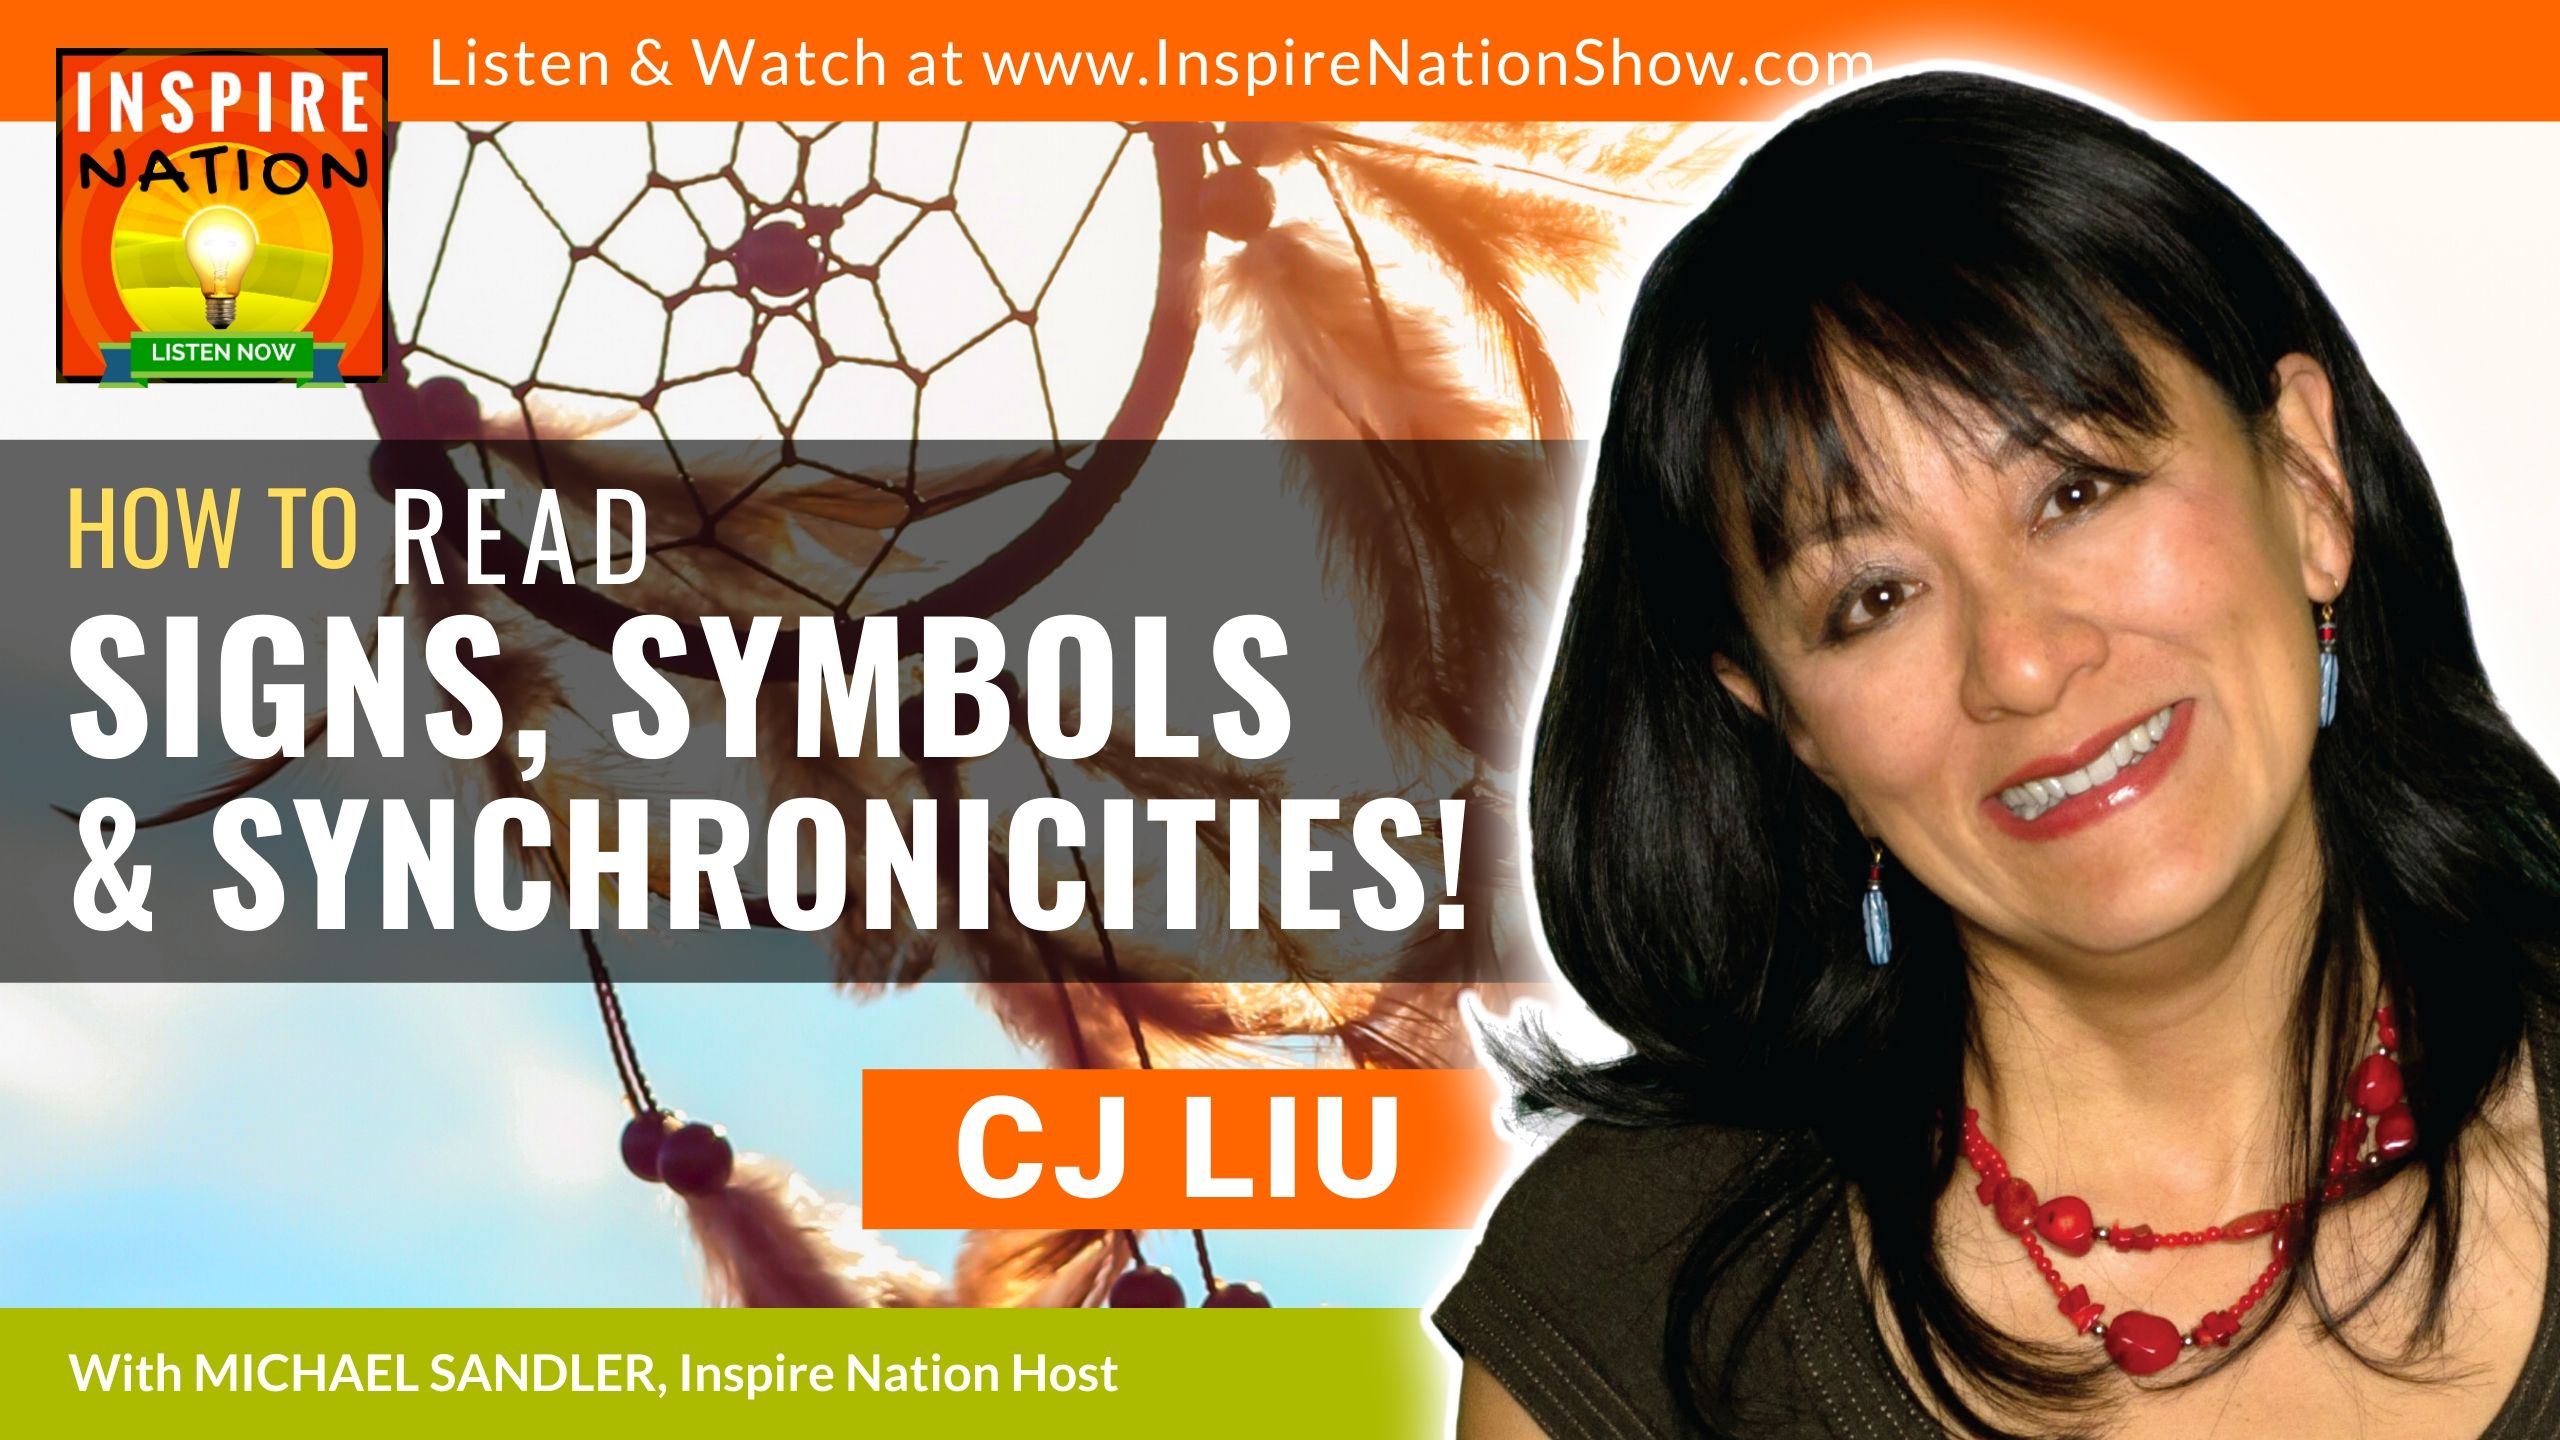 Michael Sanlder & CJ Liu chat about how to read the signs, symbols & synchronicities from the universe and how to take action!